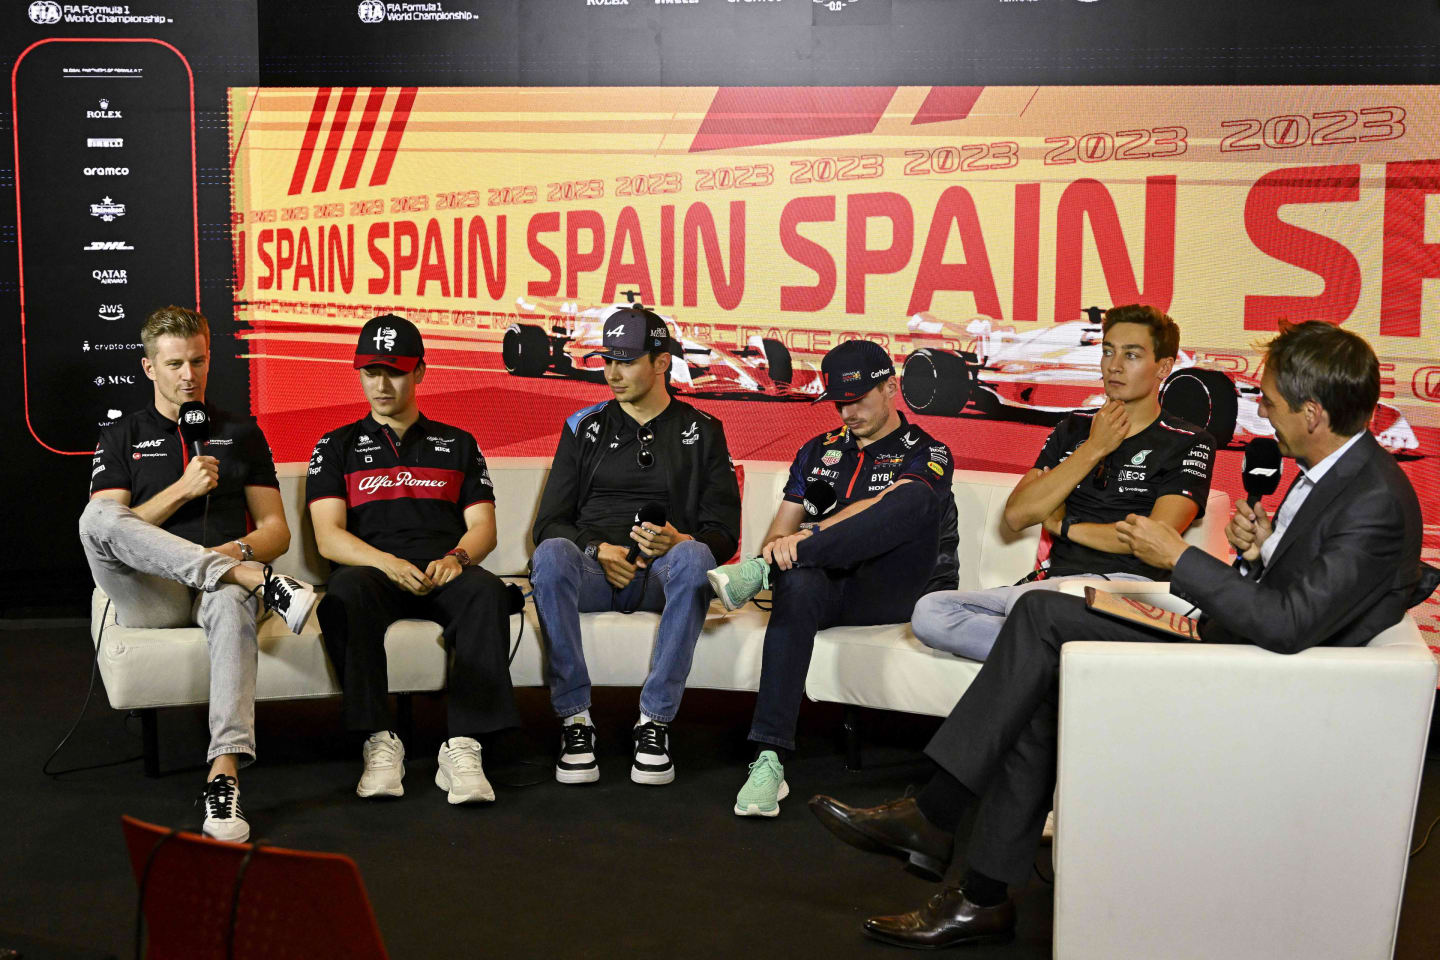 (From L) Haas F1 Team's German driver Nico Hulkenberg, Alfa Romeo's Chinese driver Zhou Guanyu, Alpine's French driver Esteban Ocon, Red Bull Racing's Dutch driver Max Verstappen and Mercedes' British driver George Russell address a press conference ahead of the Spanish Formula One Grand Prix at the Circuit de Catalunya on June 1, 2023 in Montmelo, on the outskirts of Barcelona. (Photo by JAVIER SORIANO / AFP) (Photo by JAVIER SORIANO/AFP via Getty Images)